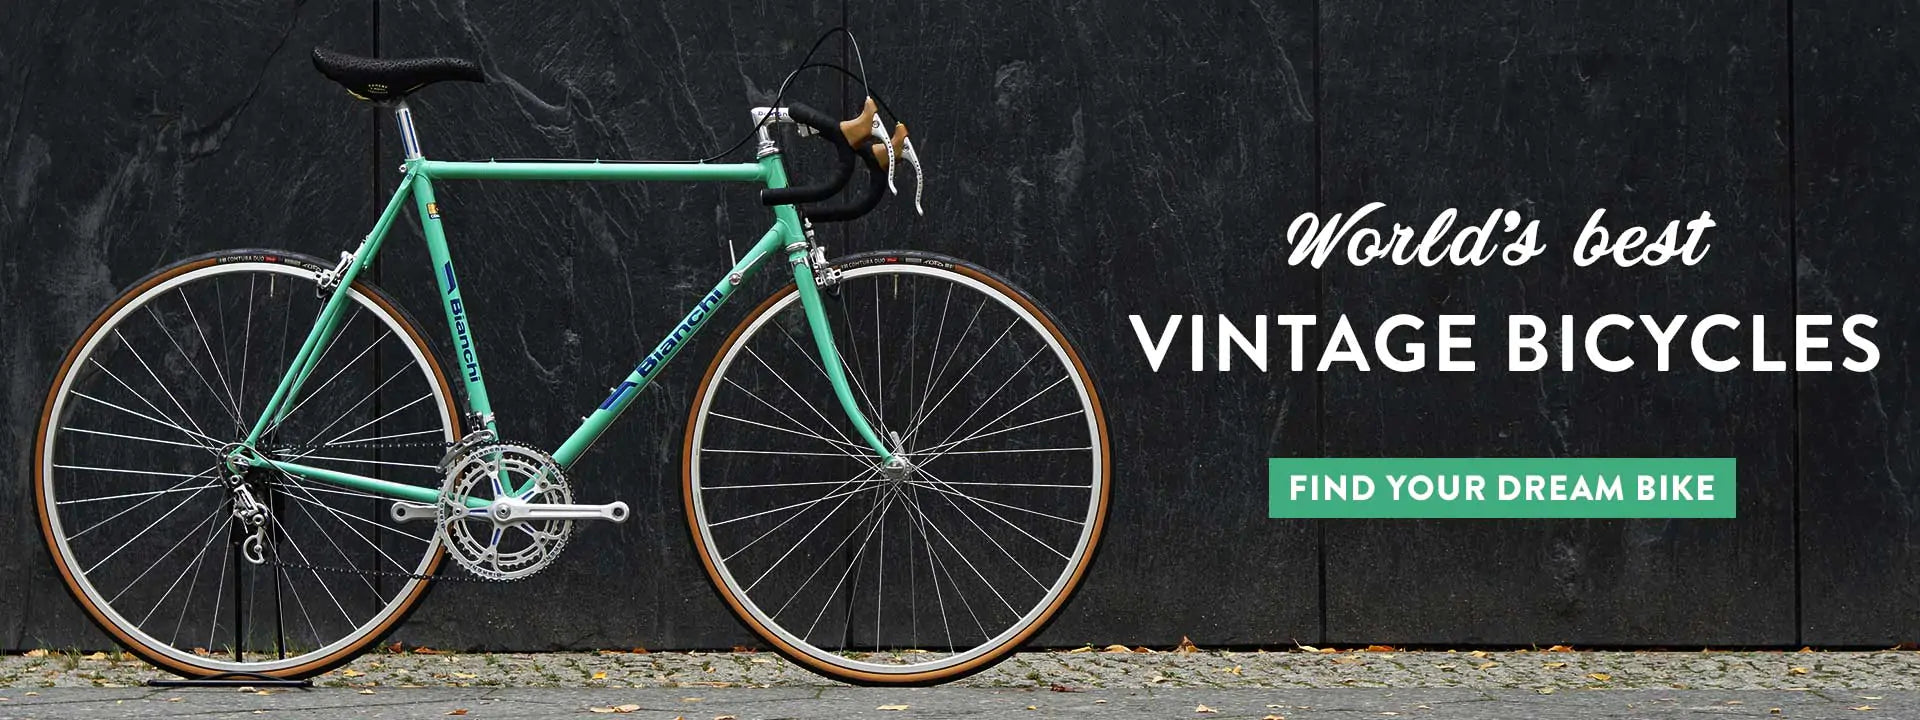 Steel Vintage Bikes Online Shop for Vintage Bicycles, Parts and more